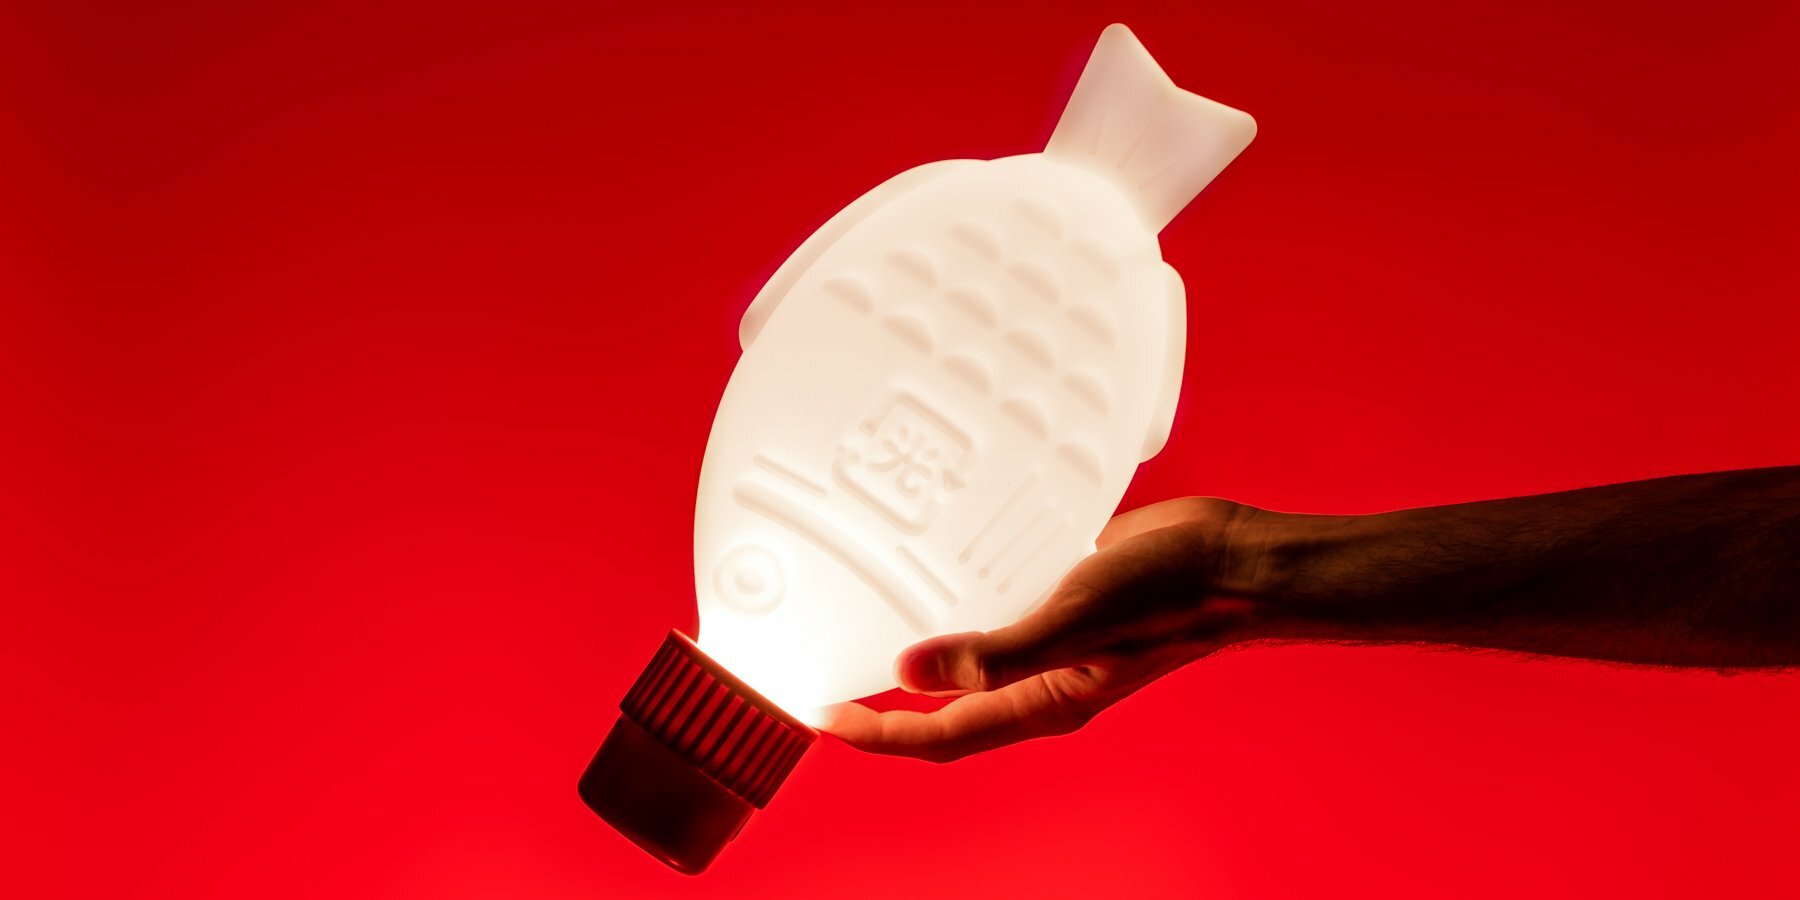 https://static.designboom.com/wp-content/uploads/2022/02/heliografs-soy-fish-lamp-is-re-made-in-recycled-ocean-bound-plastic-2-62181e1a84303.jpg